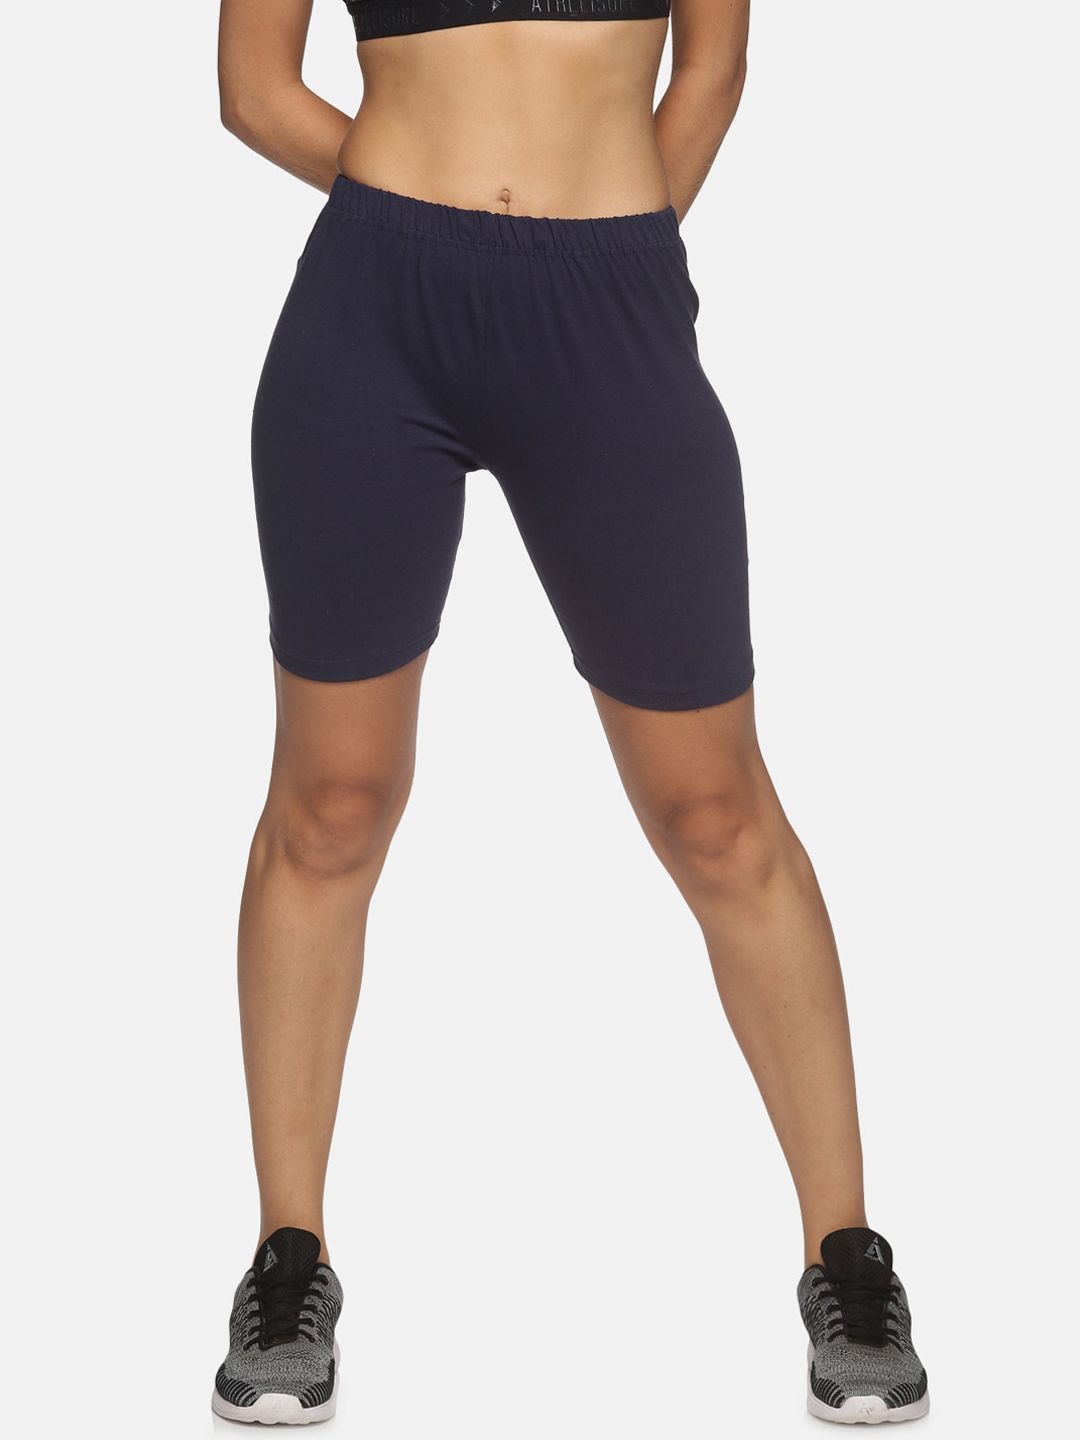 NOT YET by us Women Blue Slim Fit Outdoor Sports Shorts Price in India